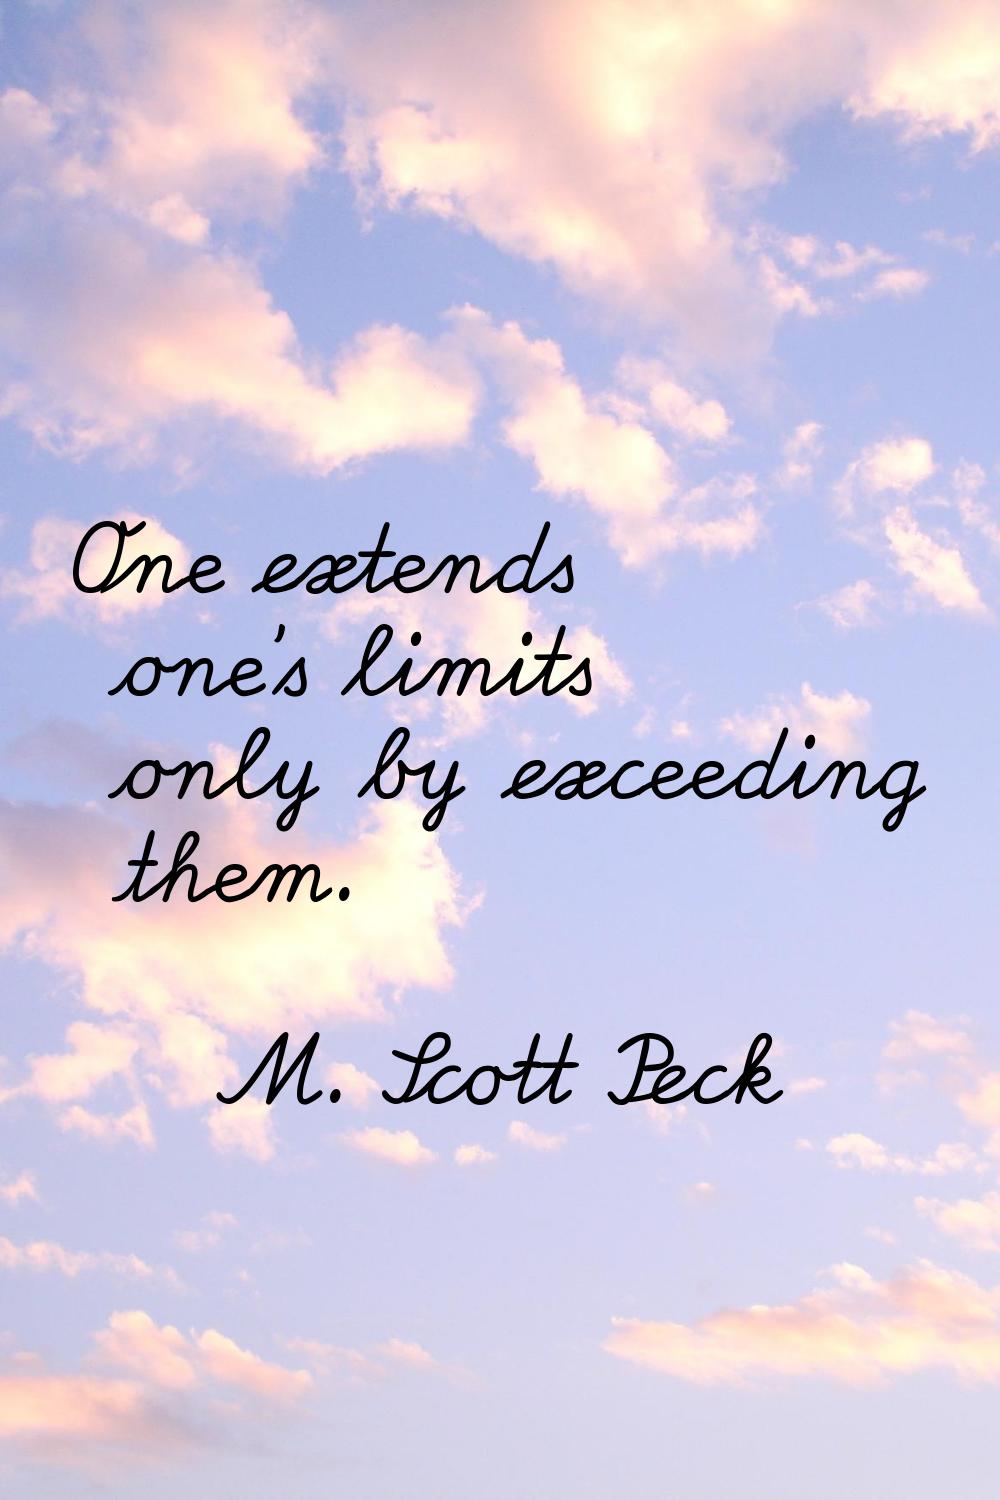 One extends one's limits only by exceeding them.